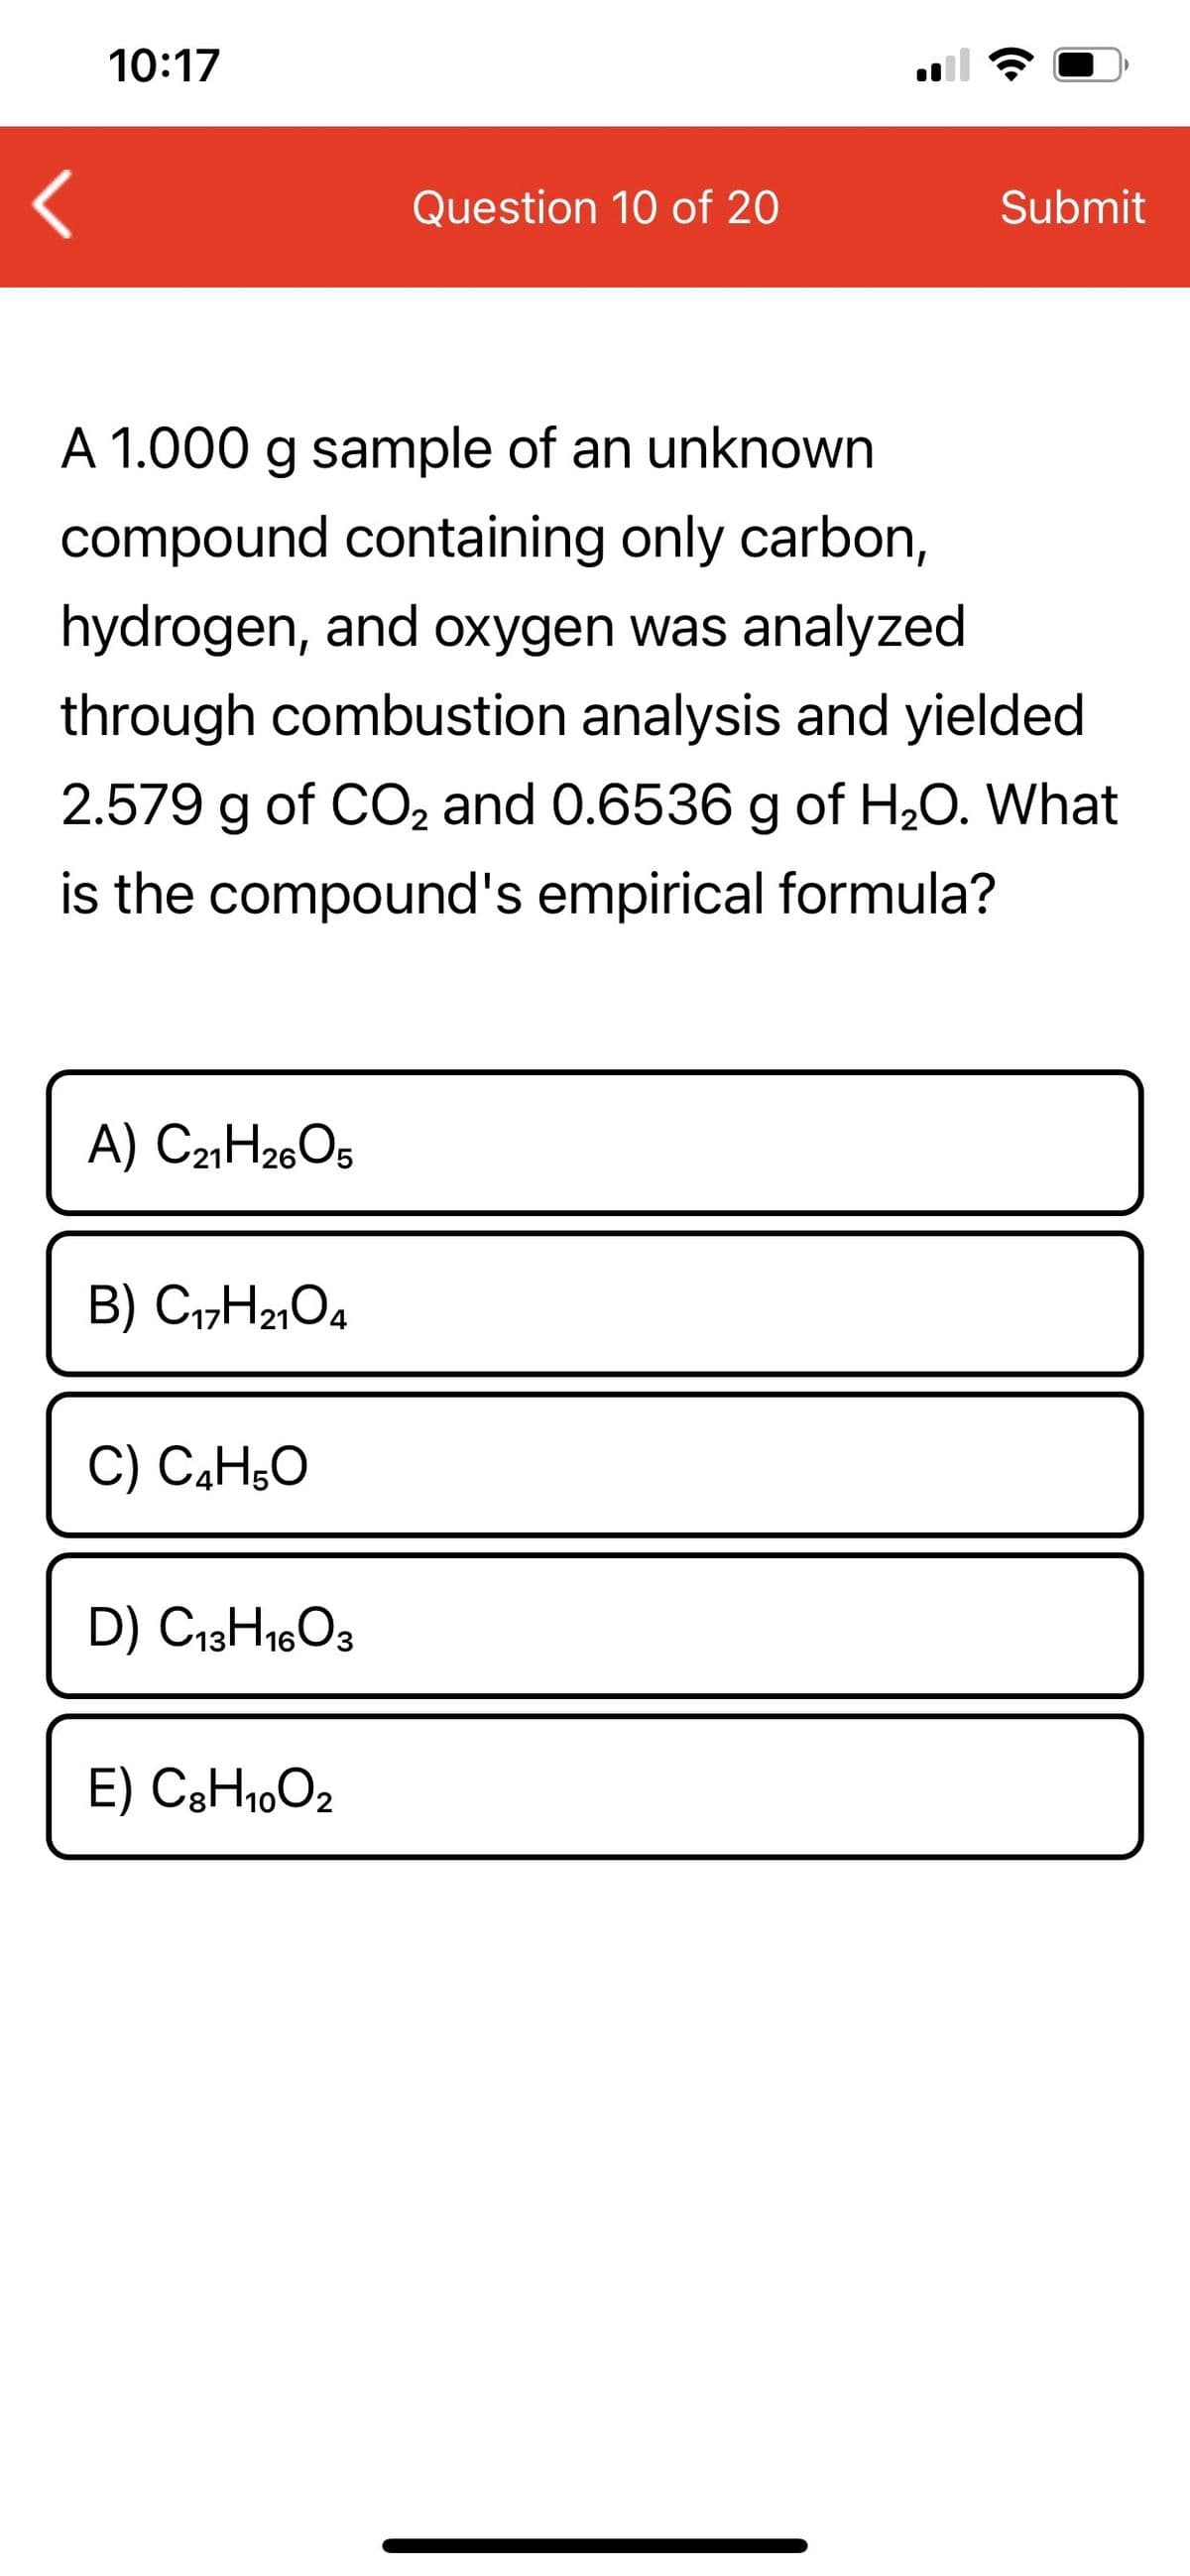 10:17
Question 10 of 20
Submit
A 1.000 g sample of an unknown
compound containing only carbon,
hydrogen, and oxygen was analyzed
through combustion analysis and yielded
2.579 g of CO, and 0.6536 g of H20. What
is the compound's empirical formula?
A) C2¾H26O5
B) C1,H2,04
C) C,H;0
D) C13H1603
E) C3H1,O2
